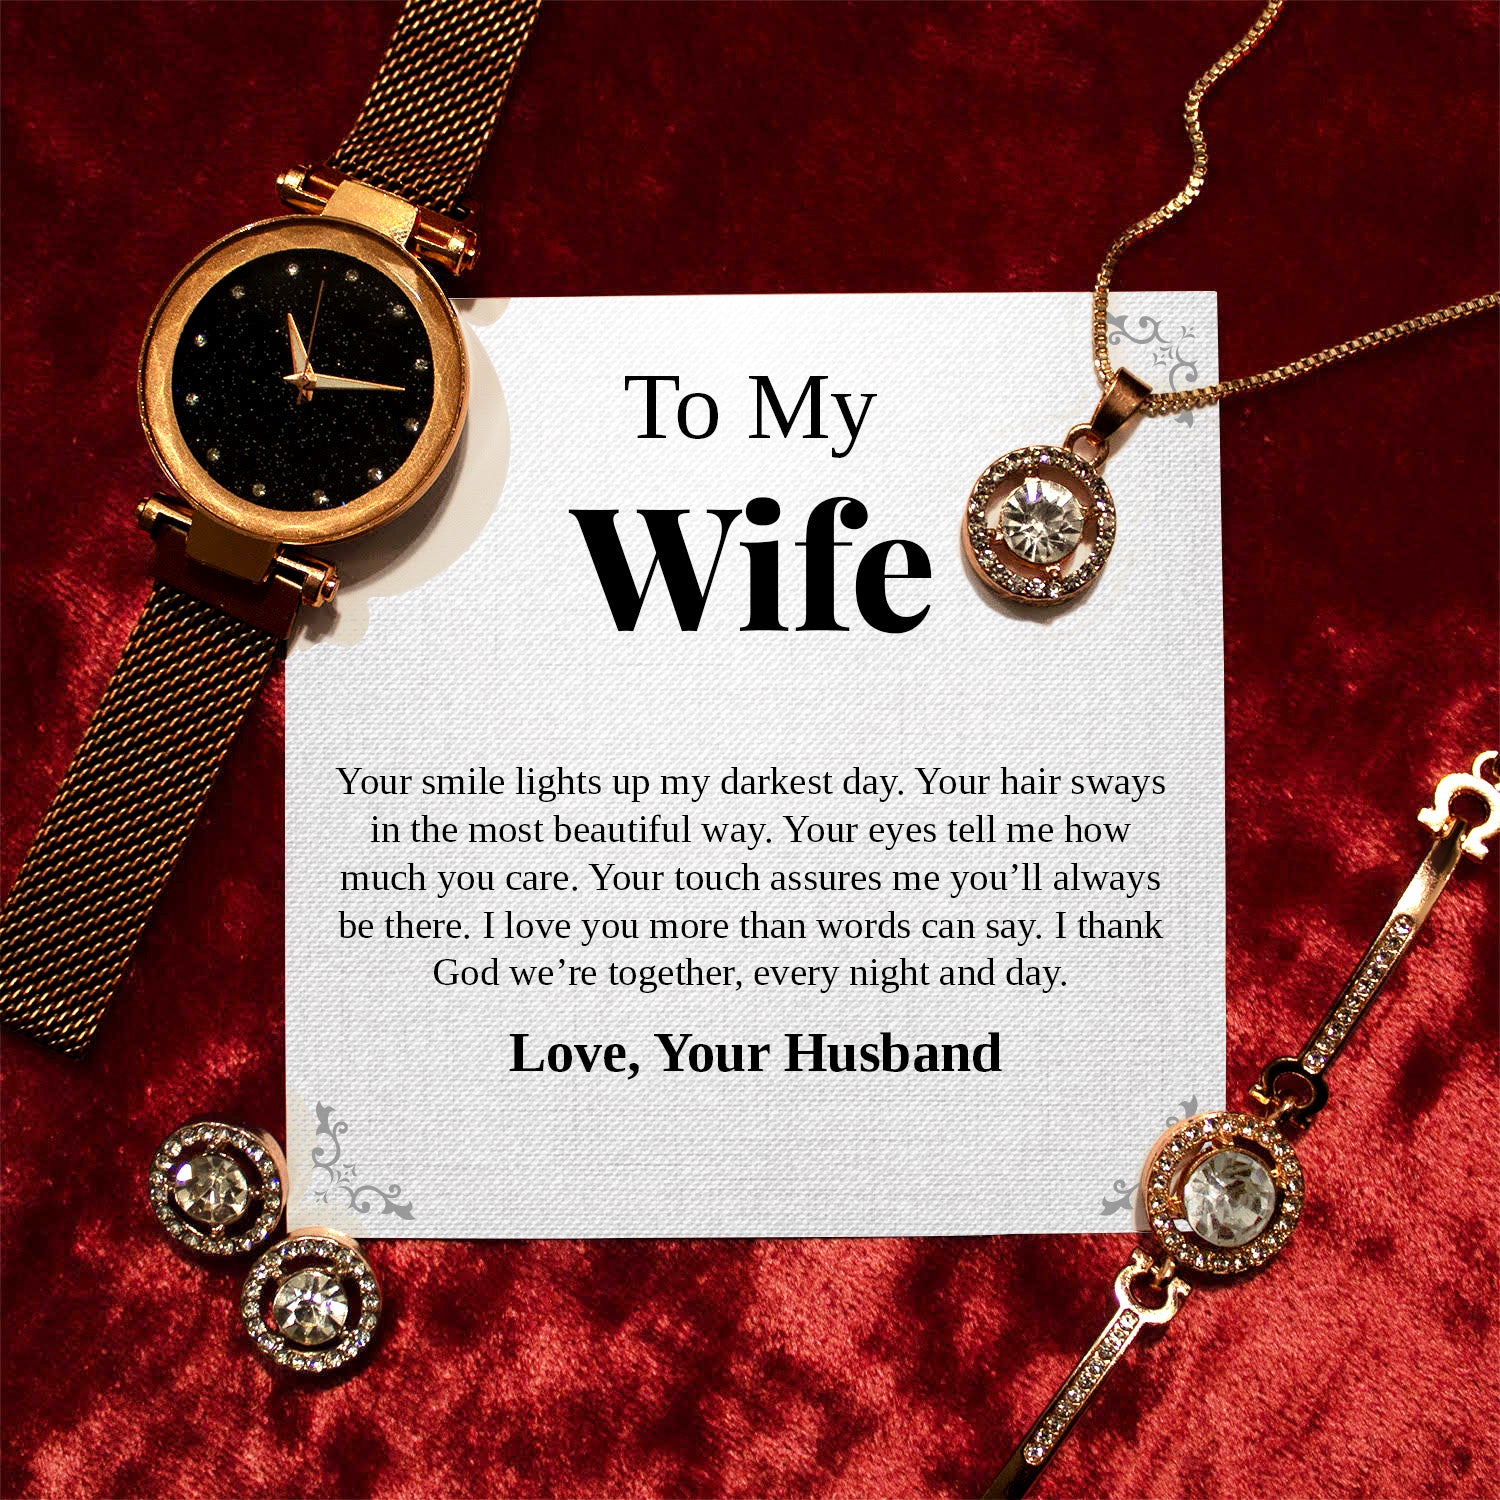 To My Wife | "Your Smile" | Cosmopolitan Set